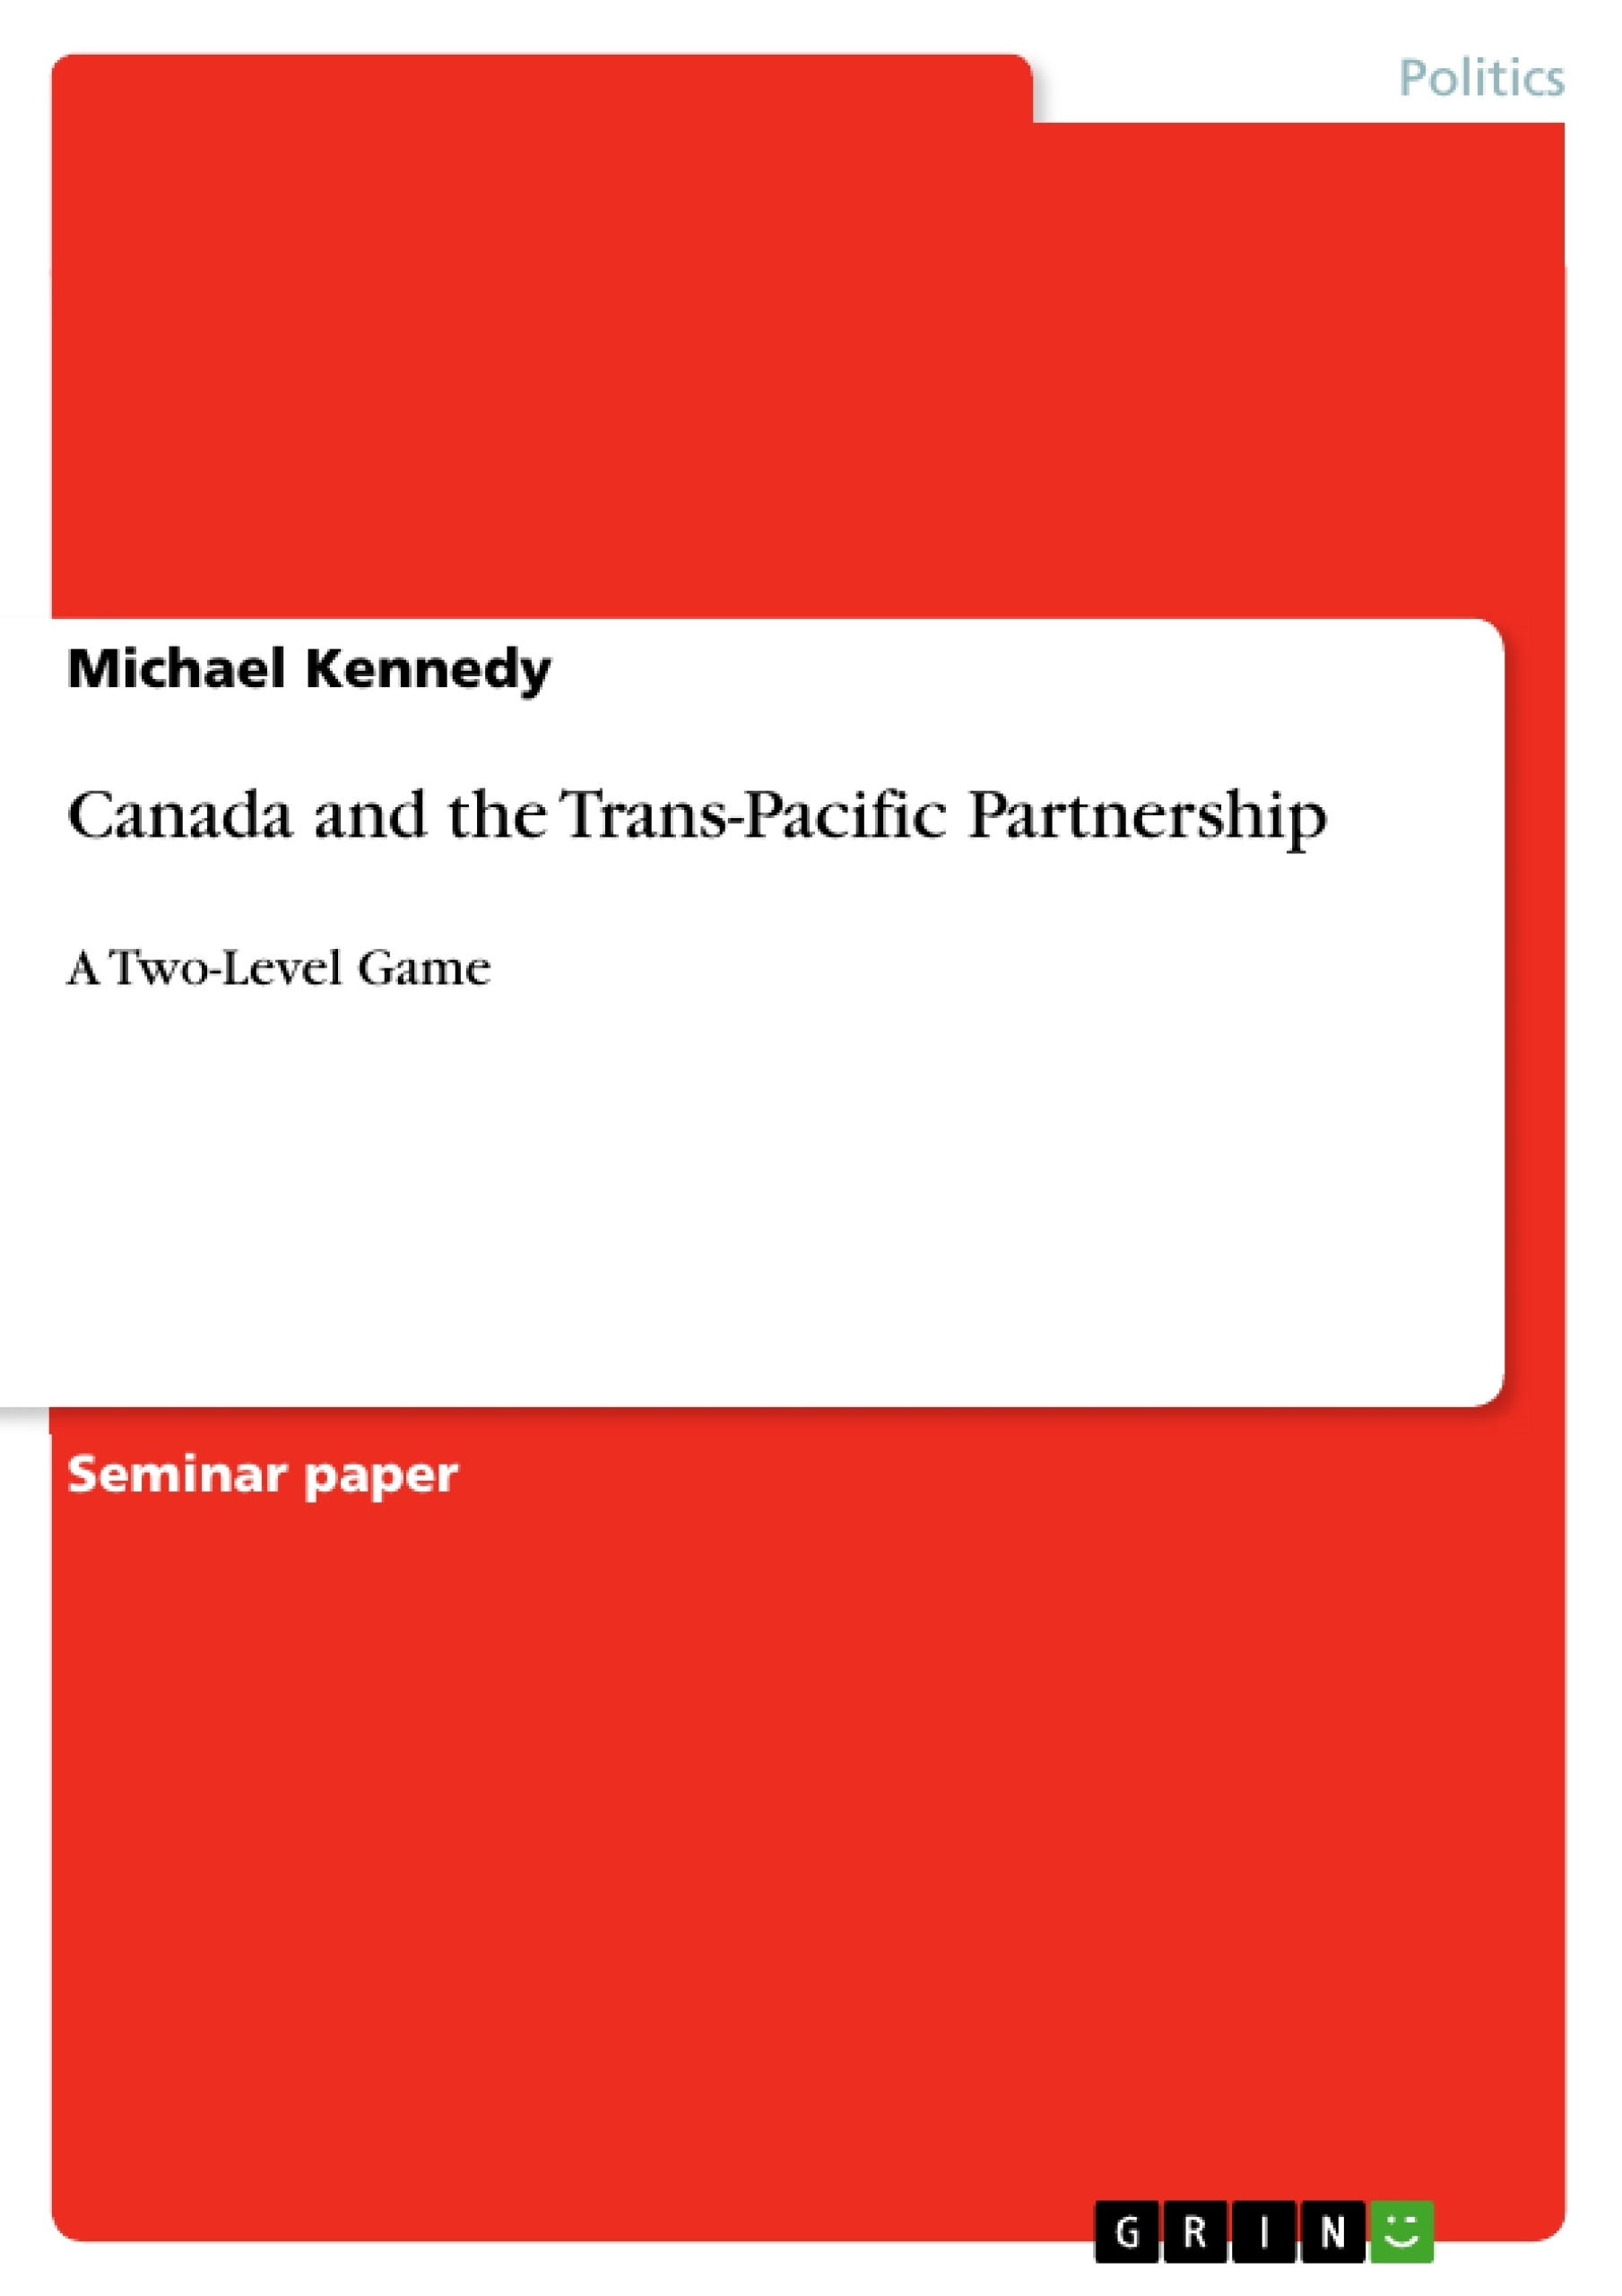 Title: Canada and the Trans-Pacific Partnership